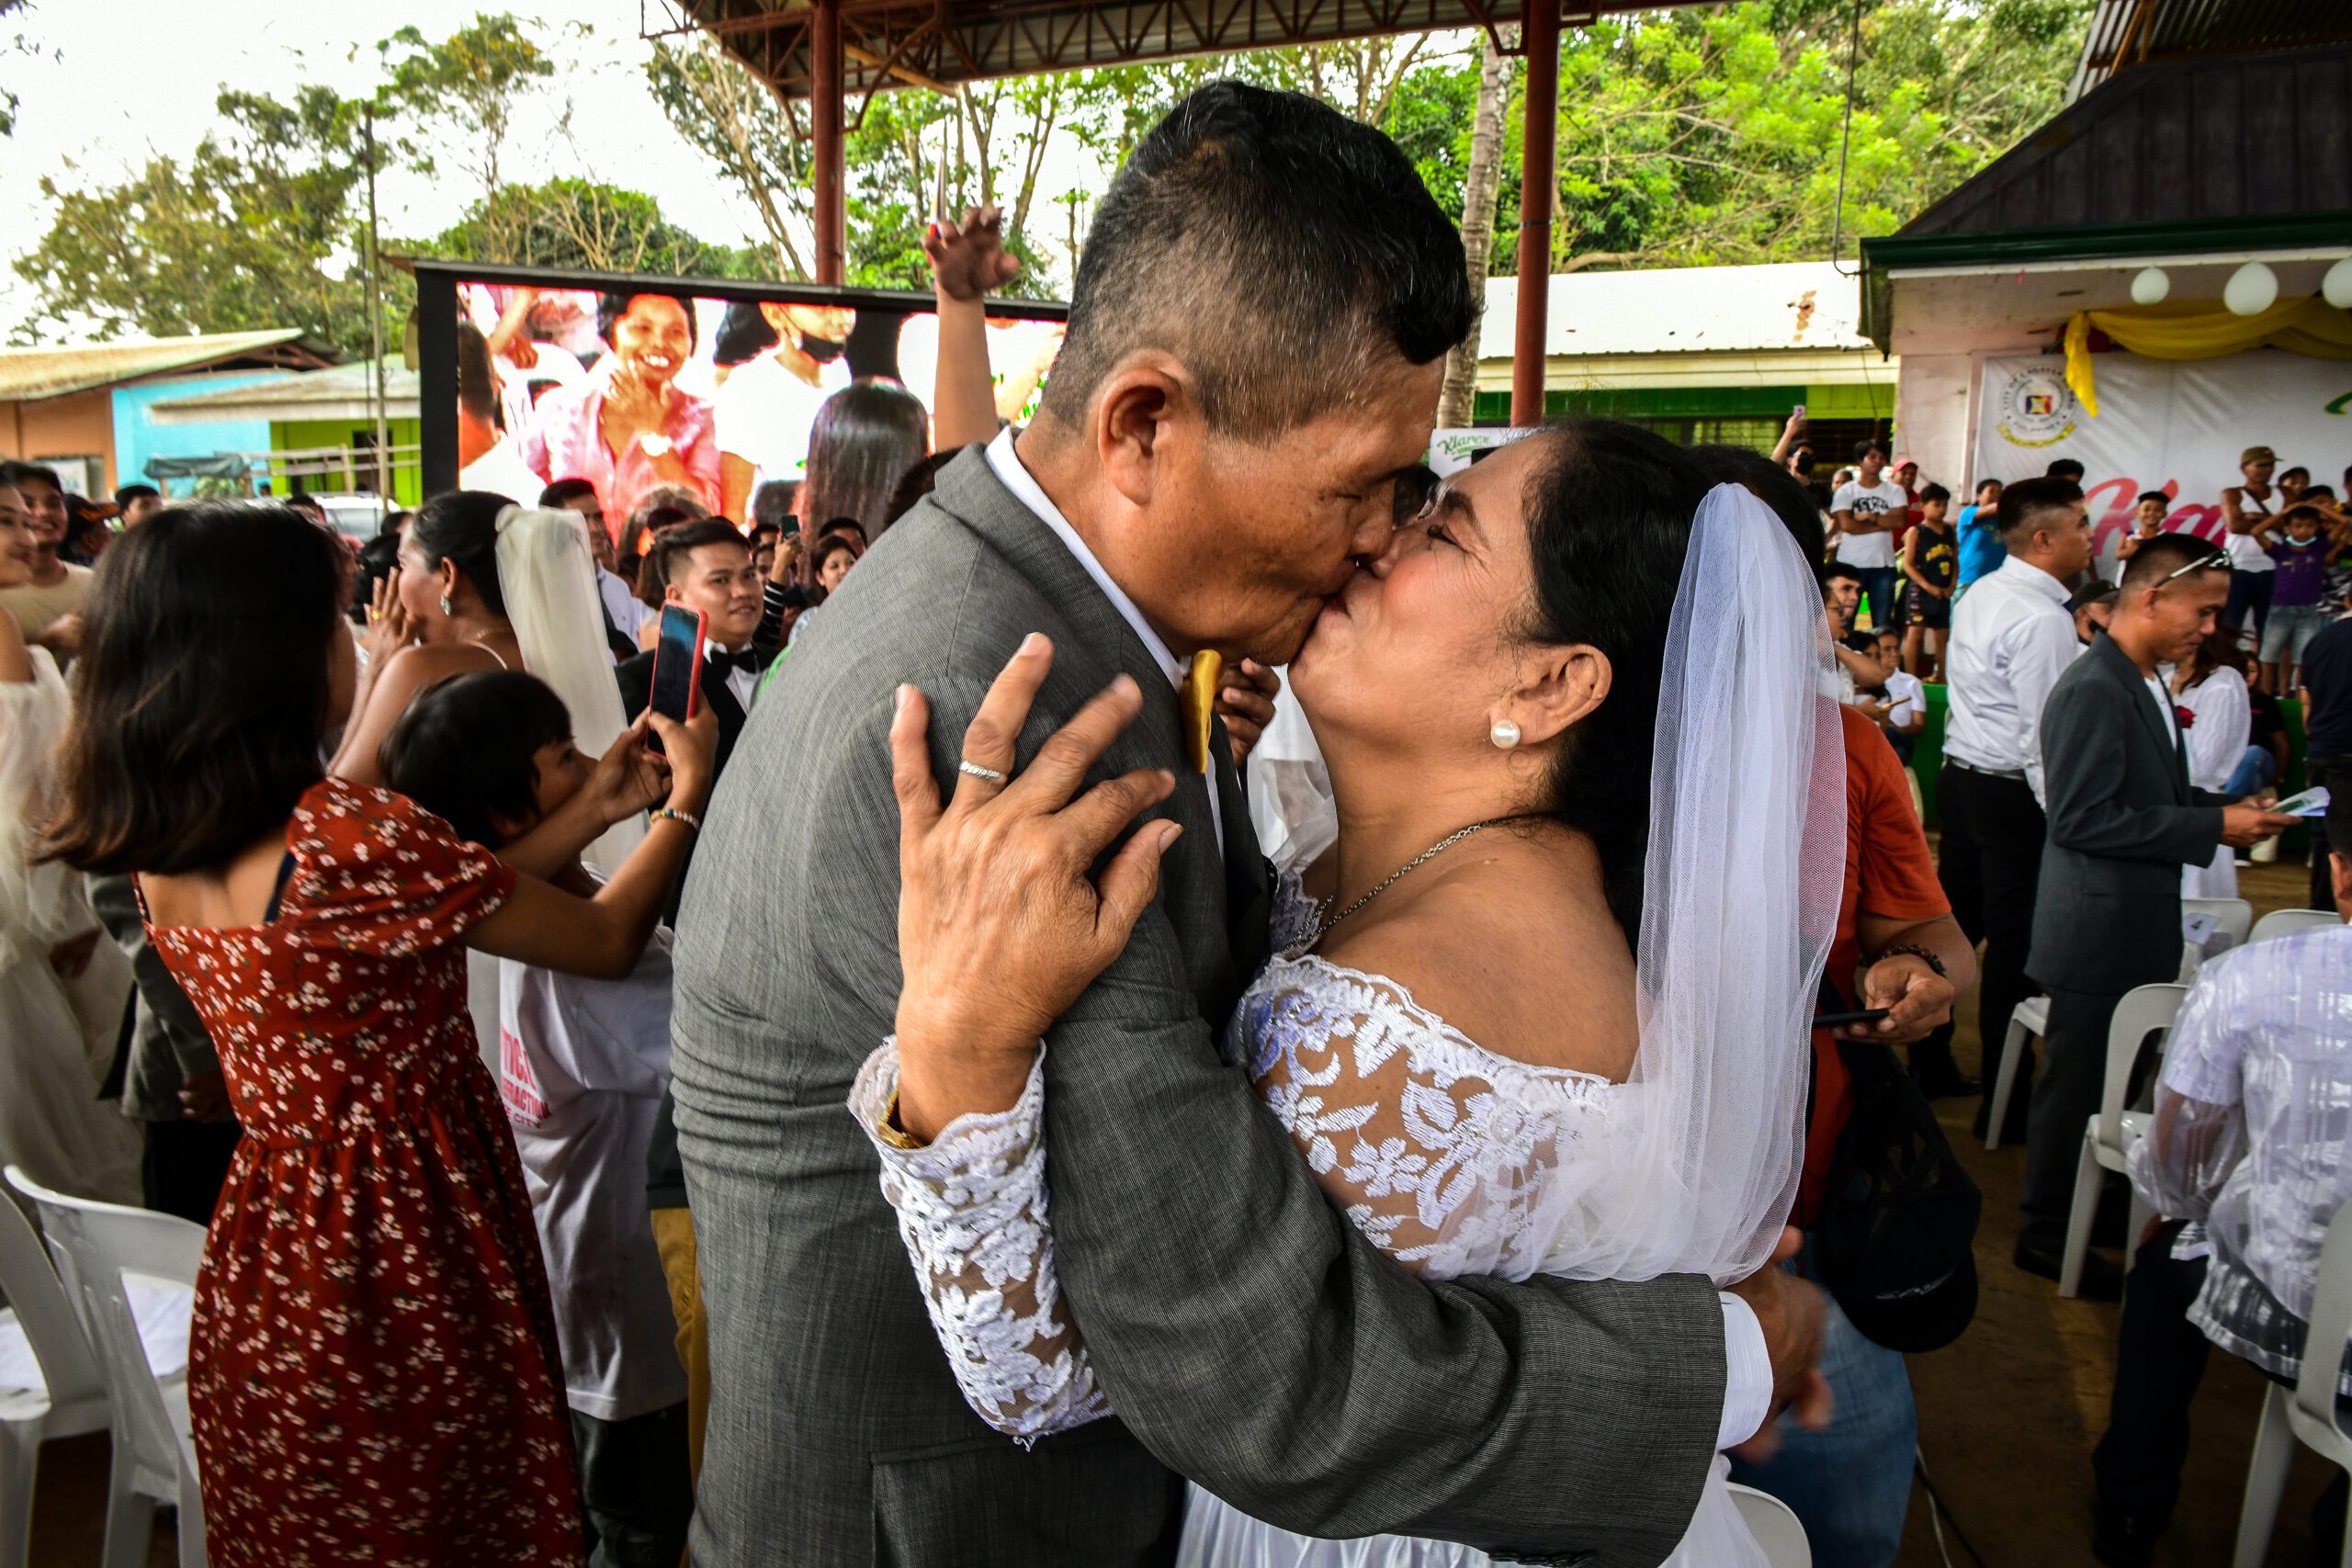 65 couples, some elderly, tie the knot in Cagayan de Oro mass wedding